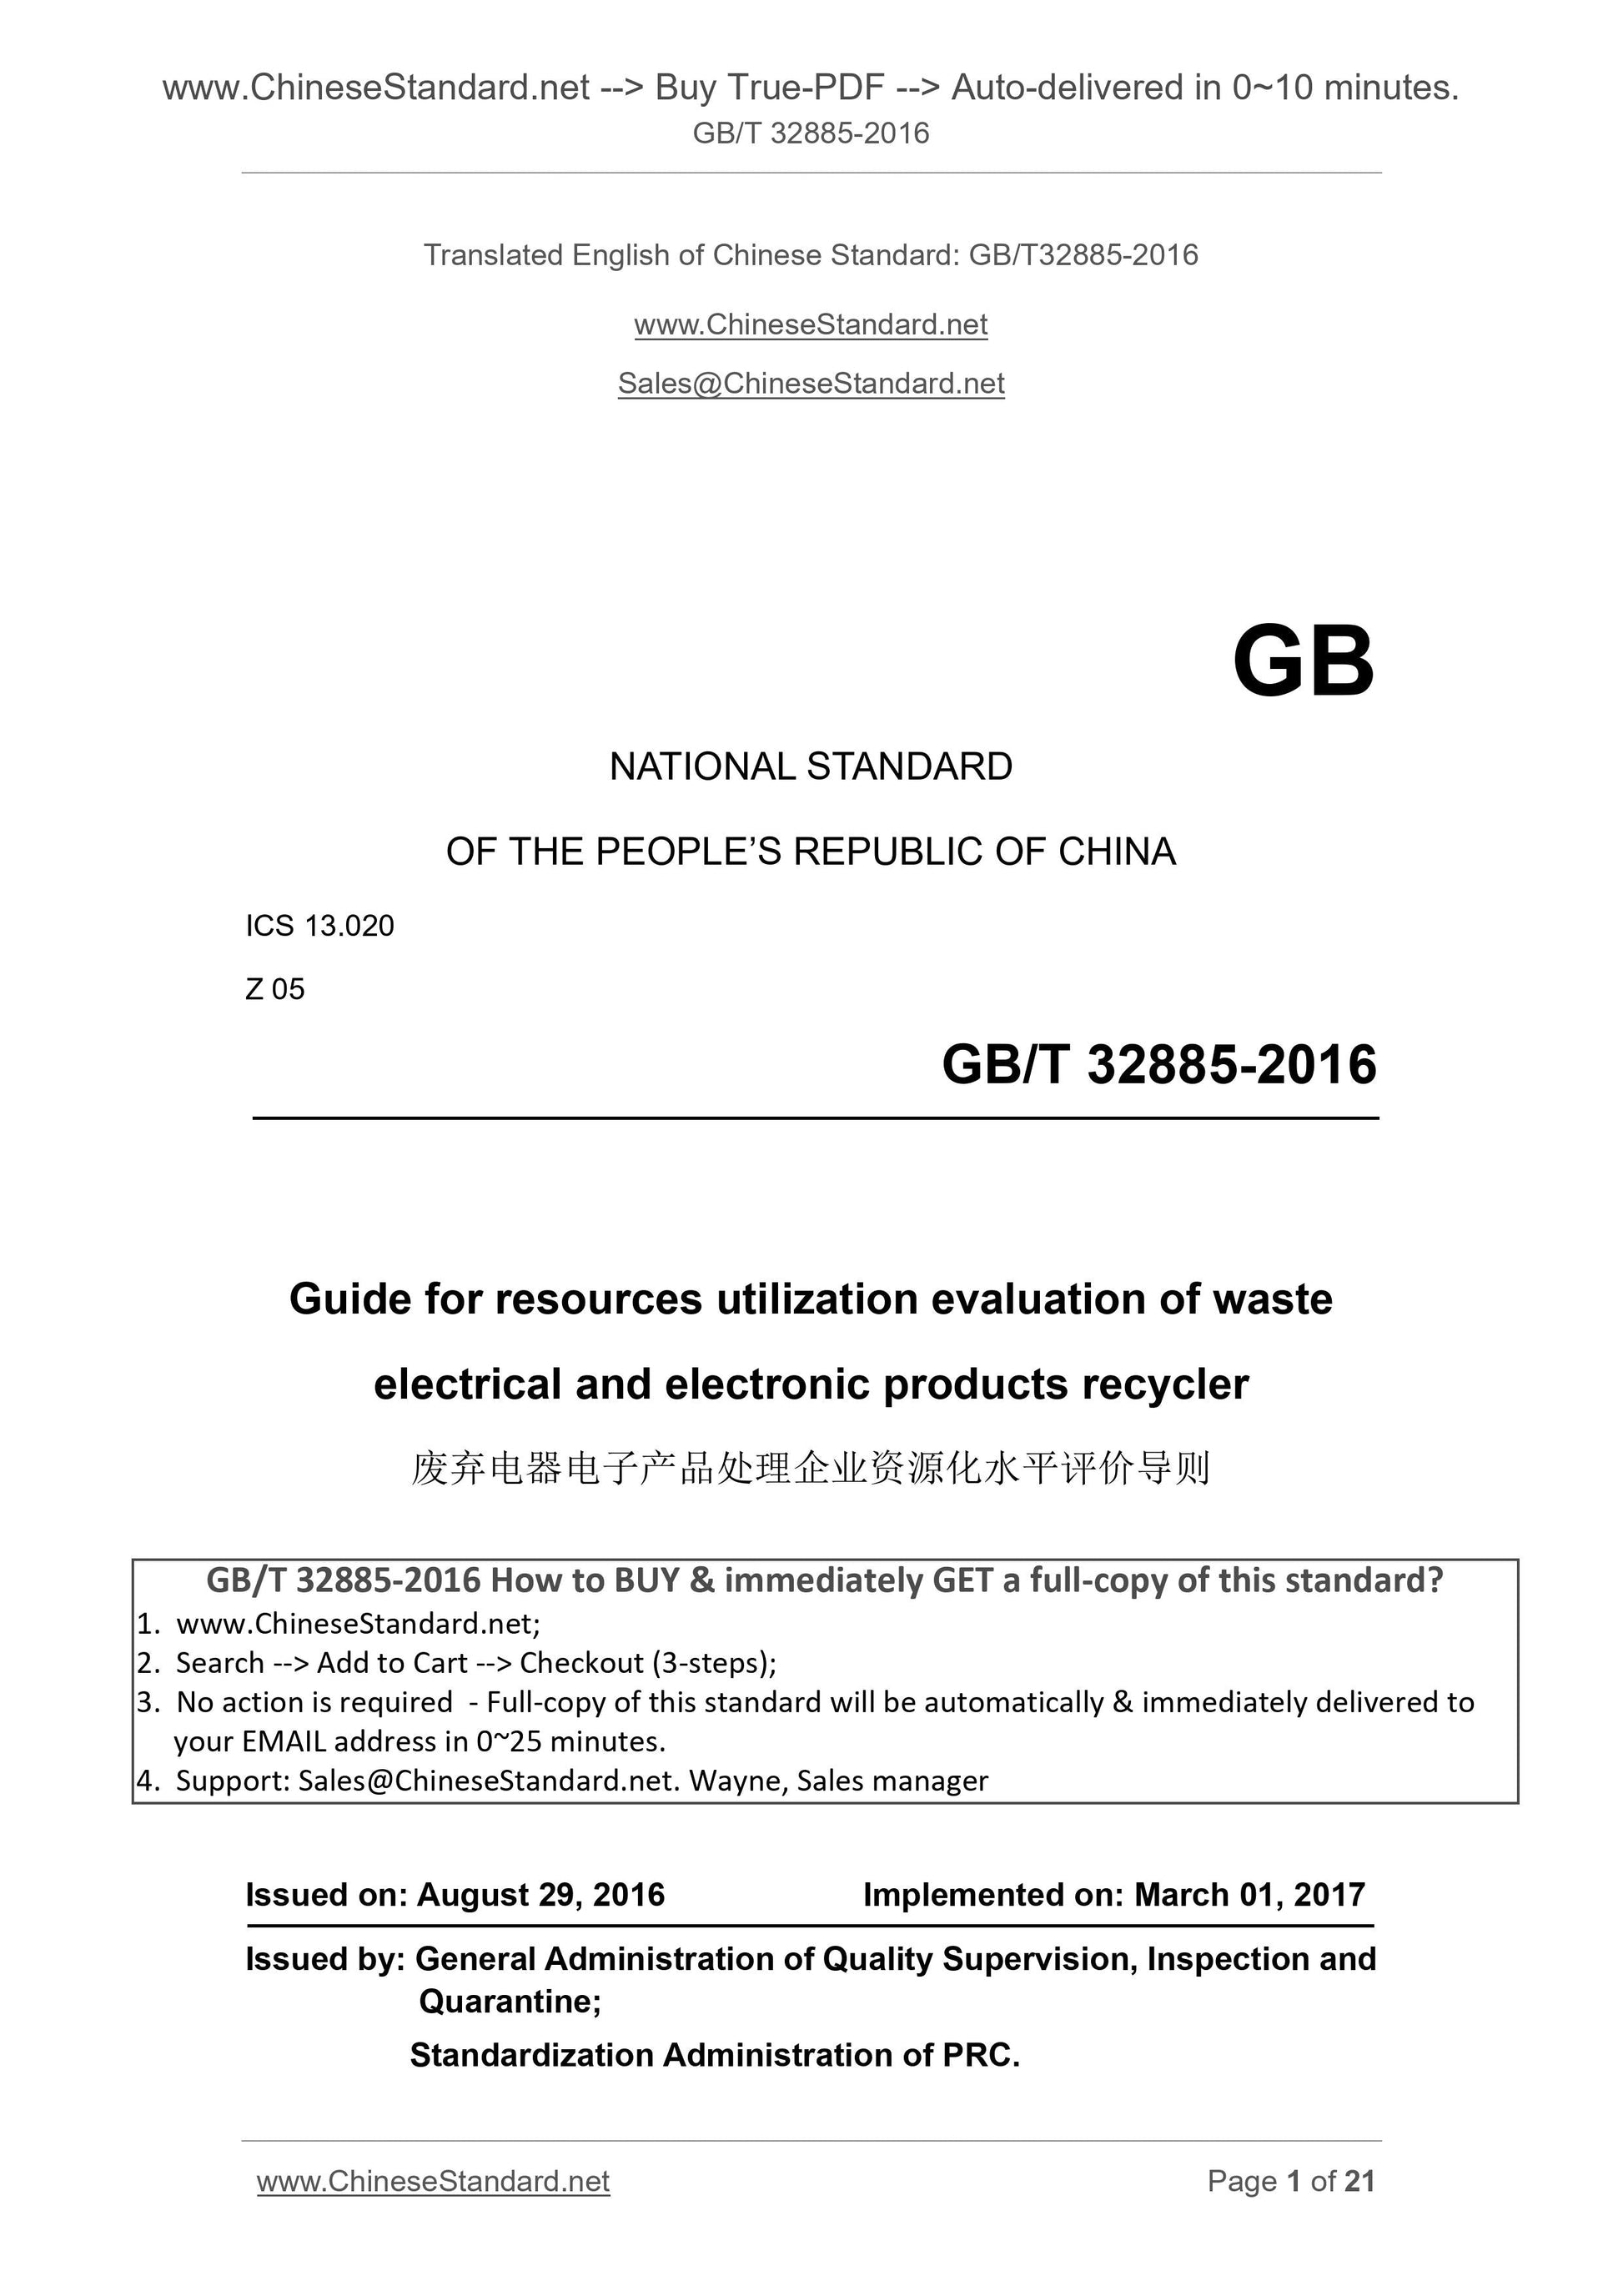 GB/T 32885-2016 Page 1